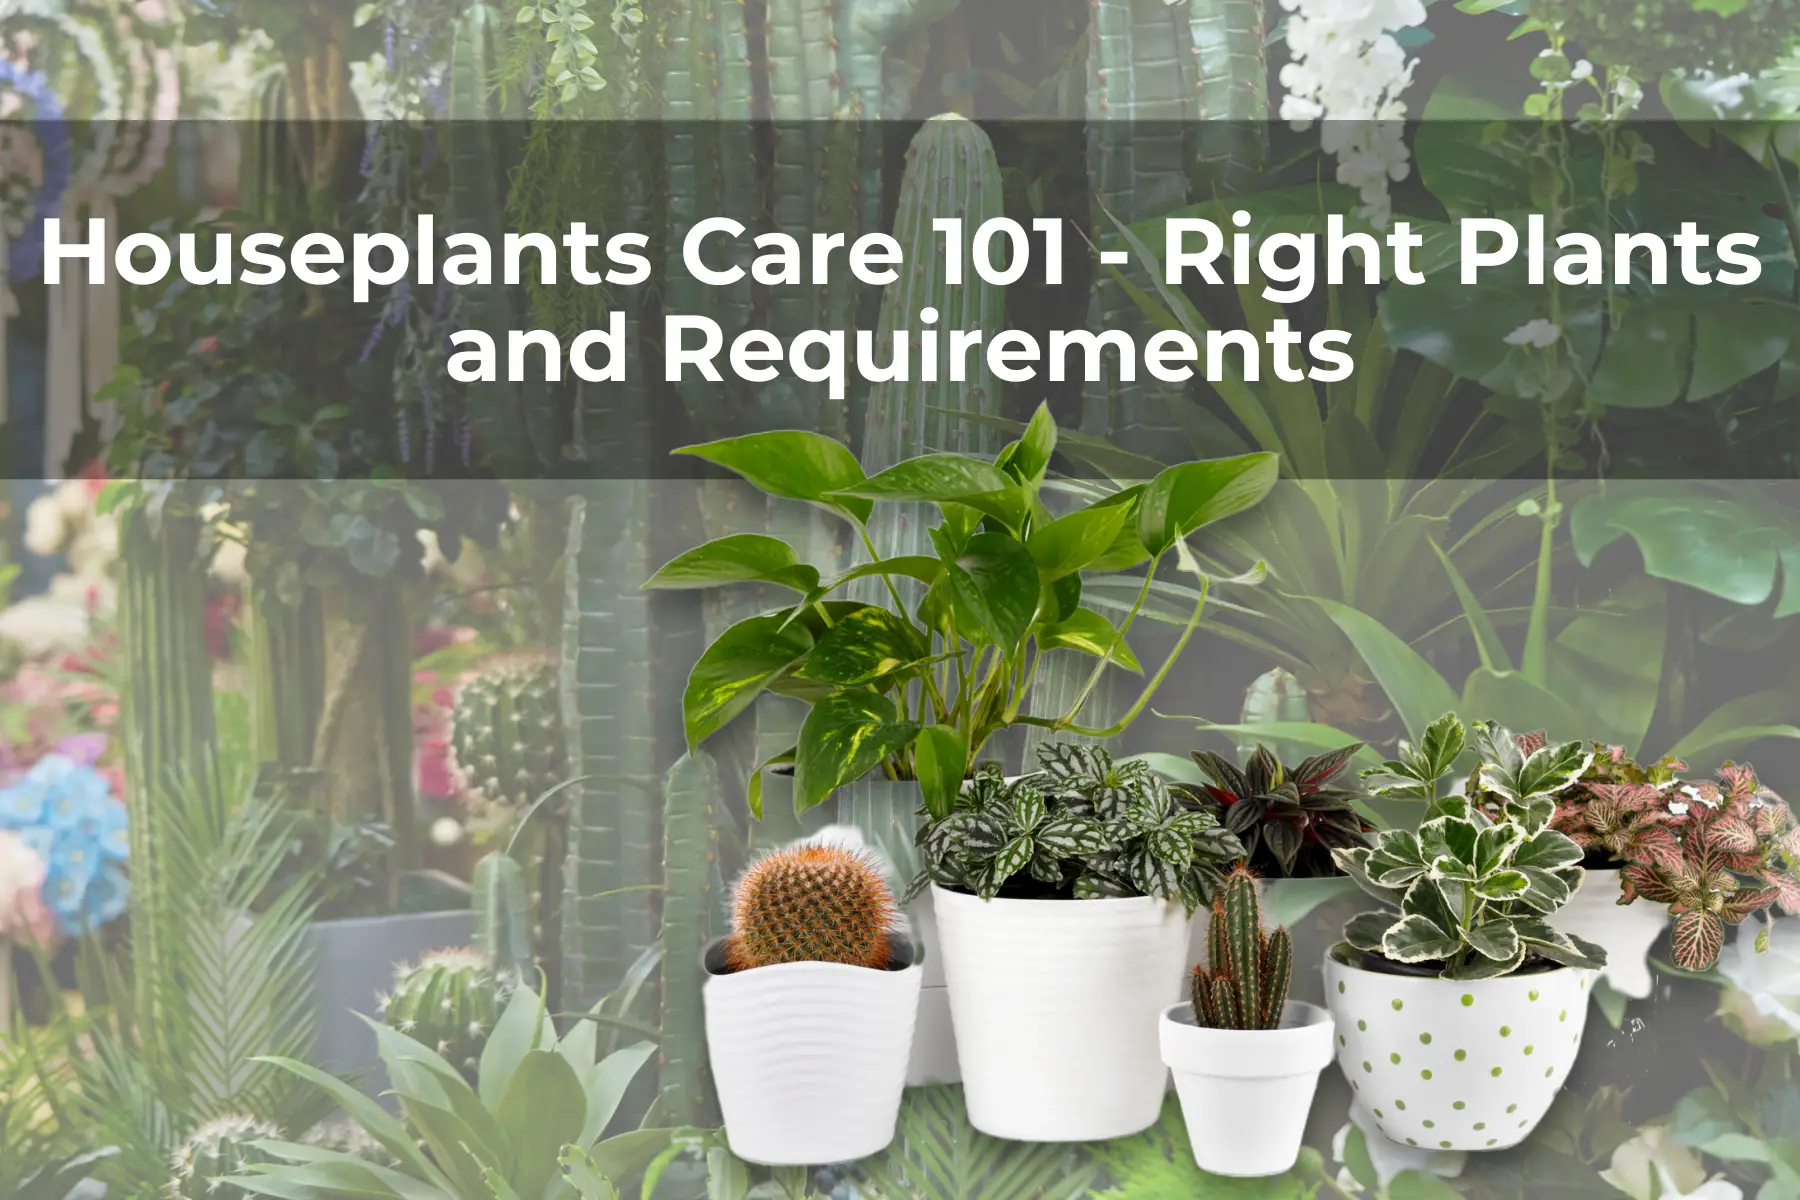 Houseplants Care 101 - Right Plants and Requirements